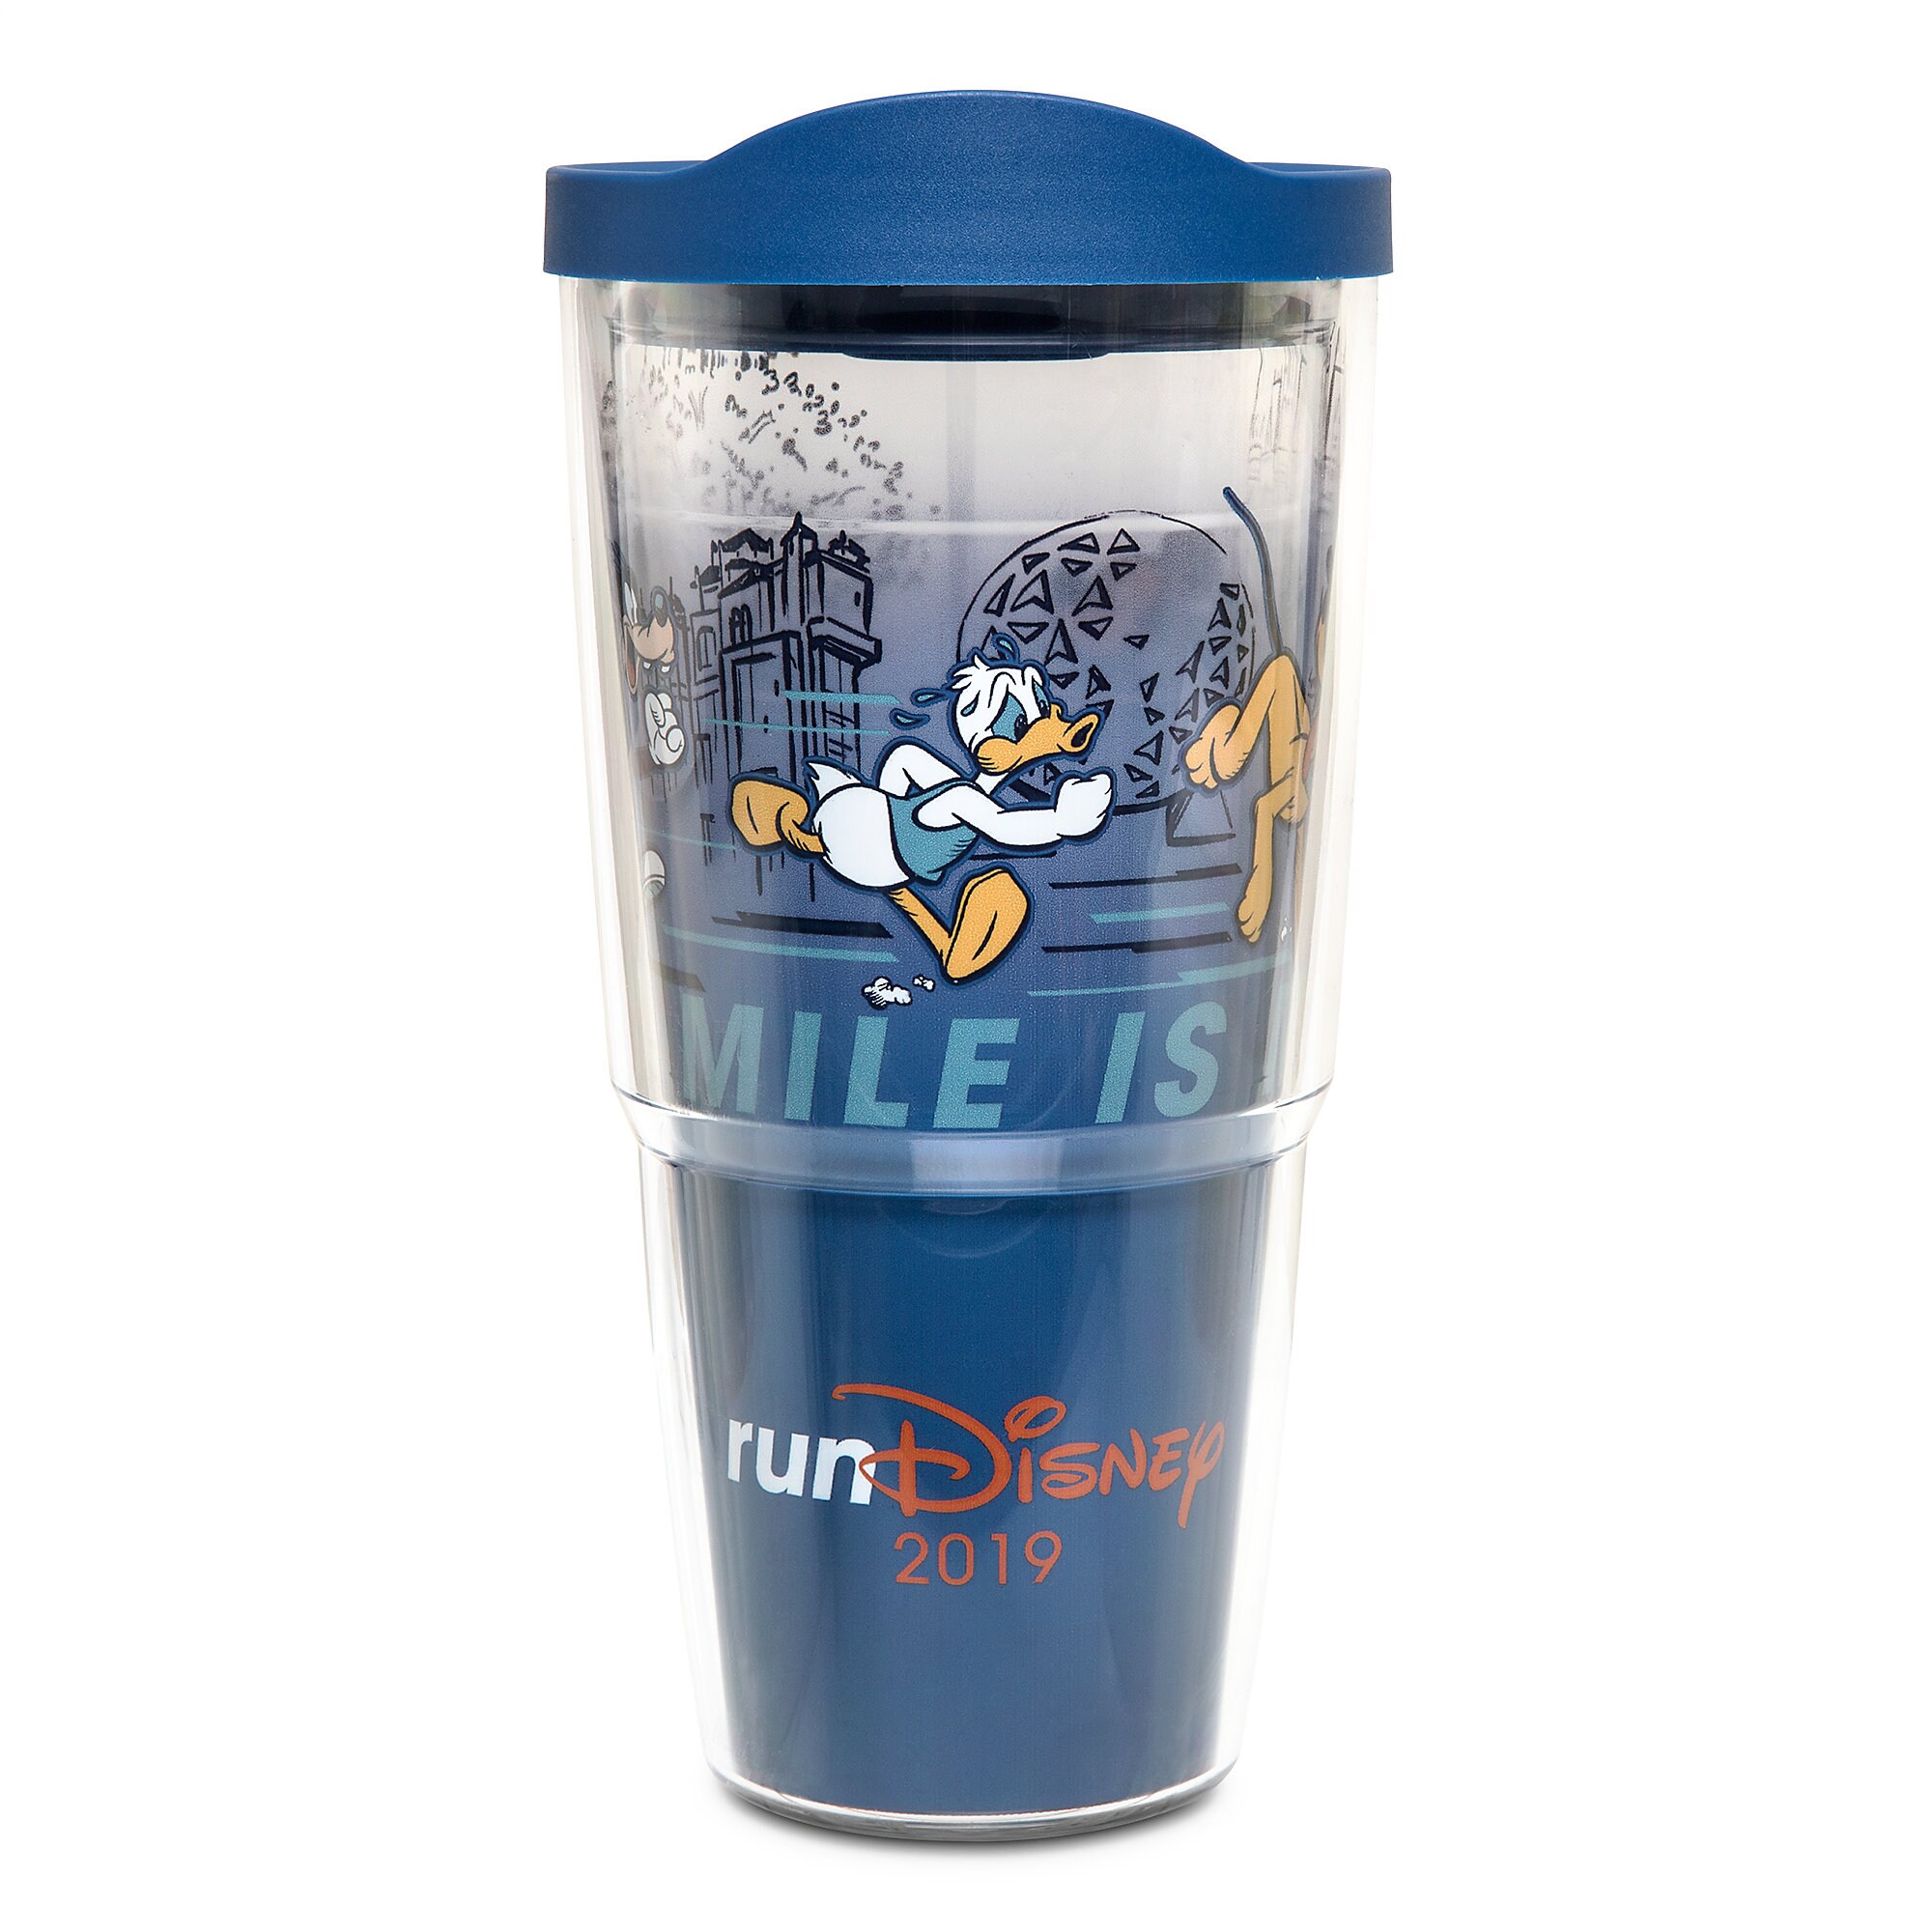 Mickey Mouse and Friends runDisney Travel Tumbler by Tervis - 2019